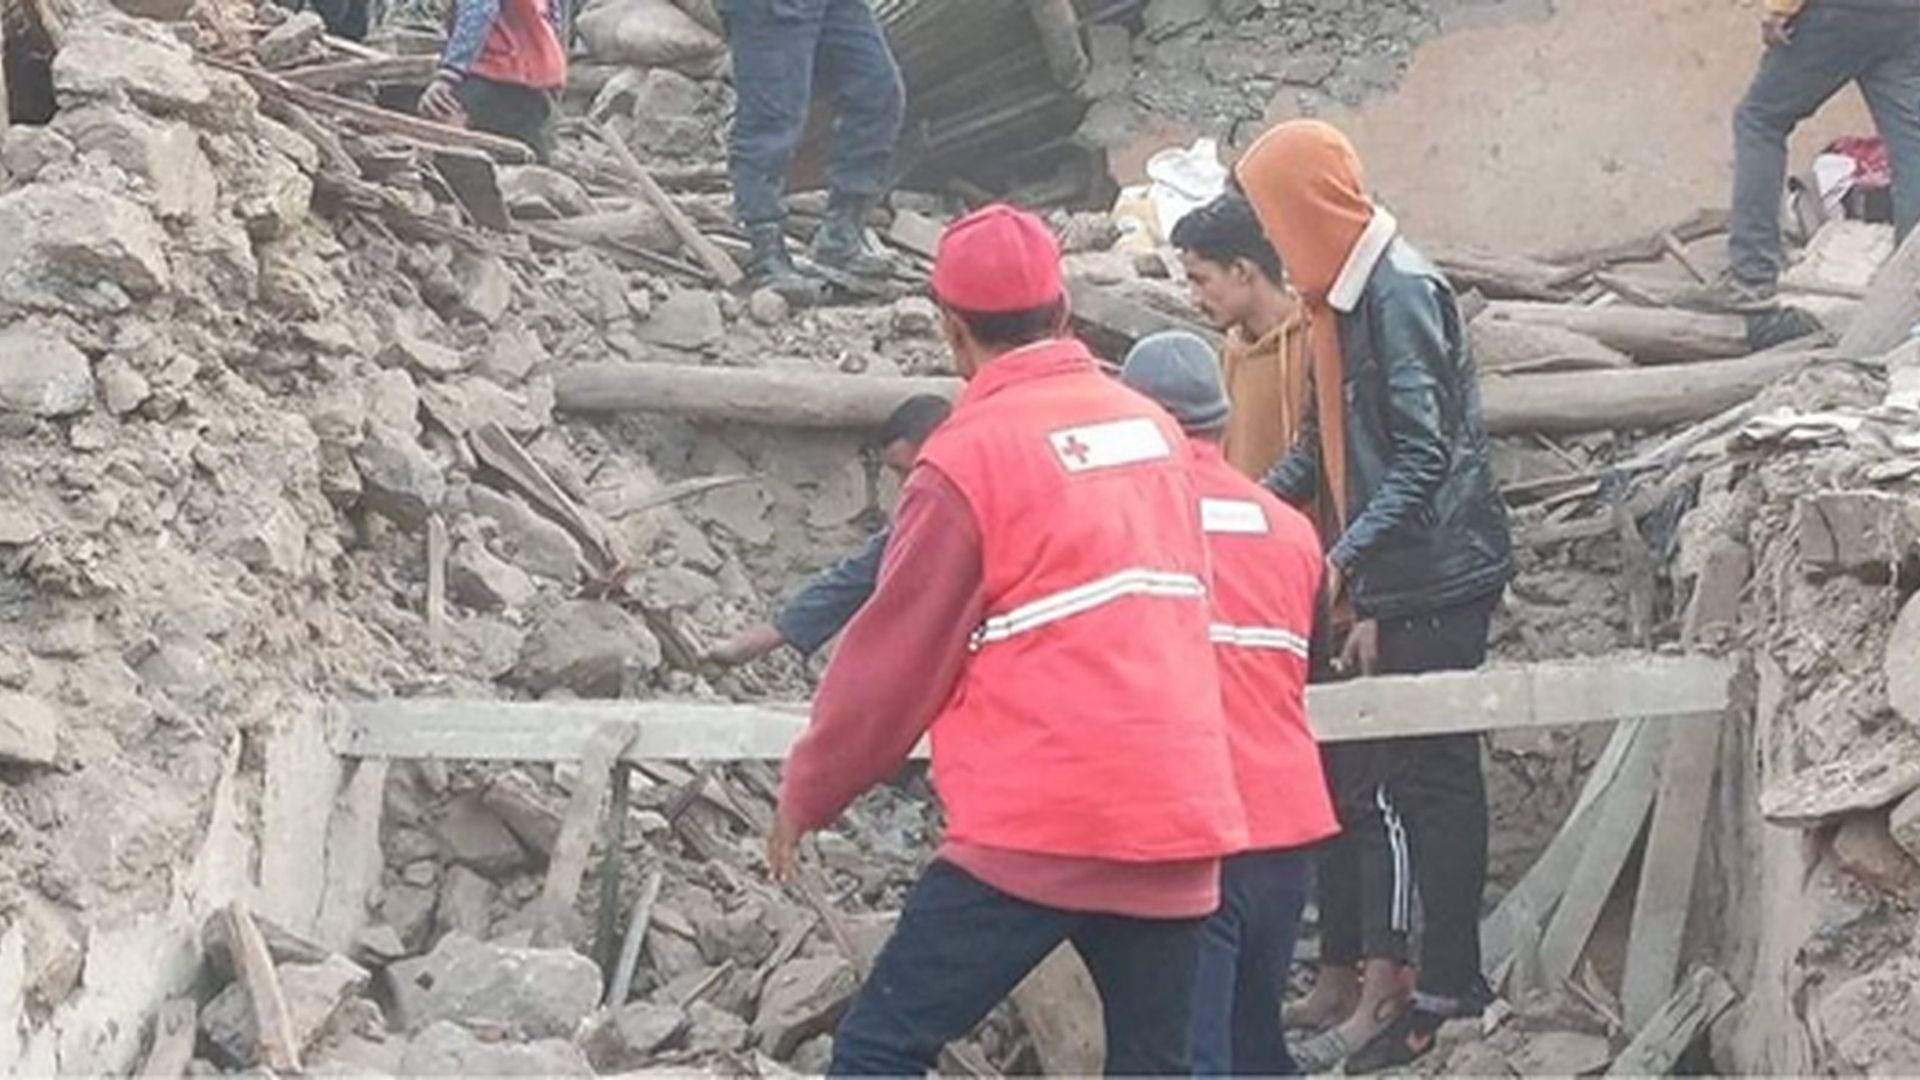  Nepal Red Cross Society volunteers helping with recovery efforts after the quake on Wednesday.